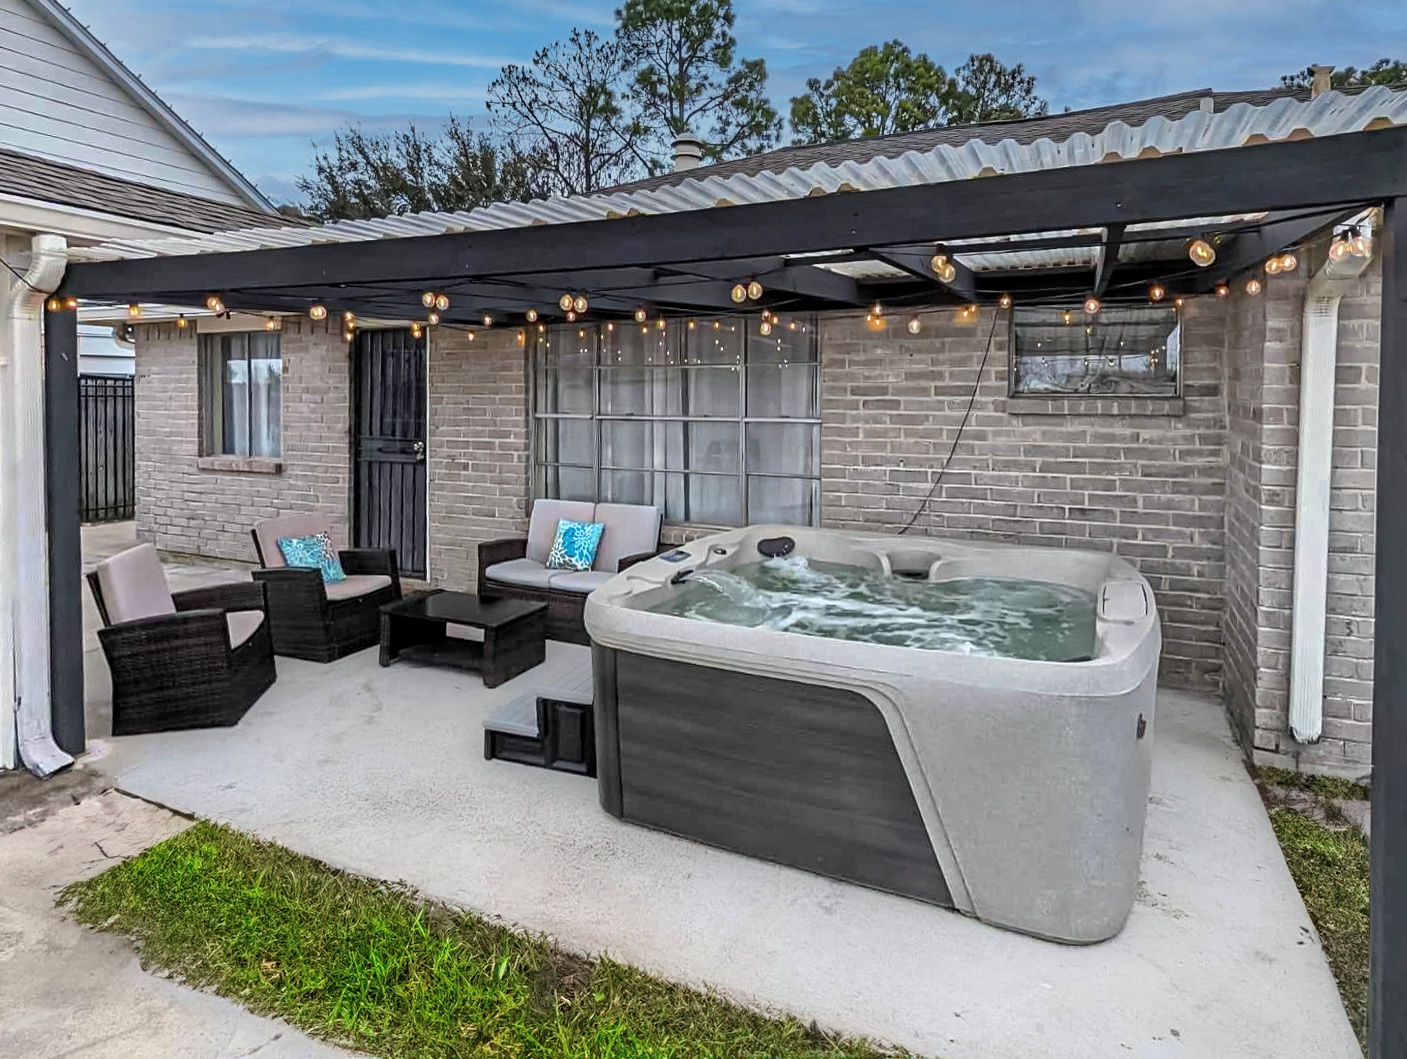 Lounge the day away or soak in the private hot tub on the serene patio